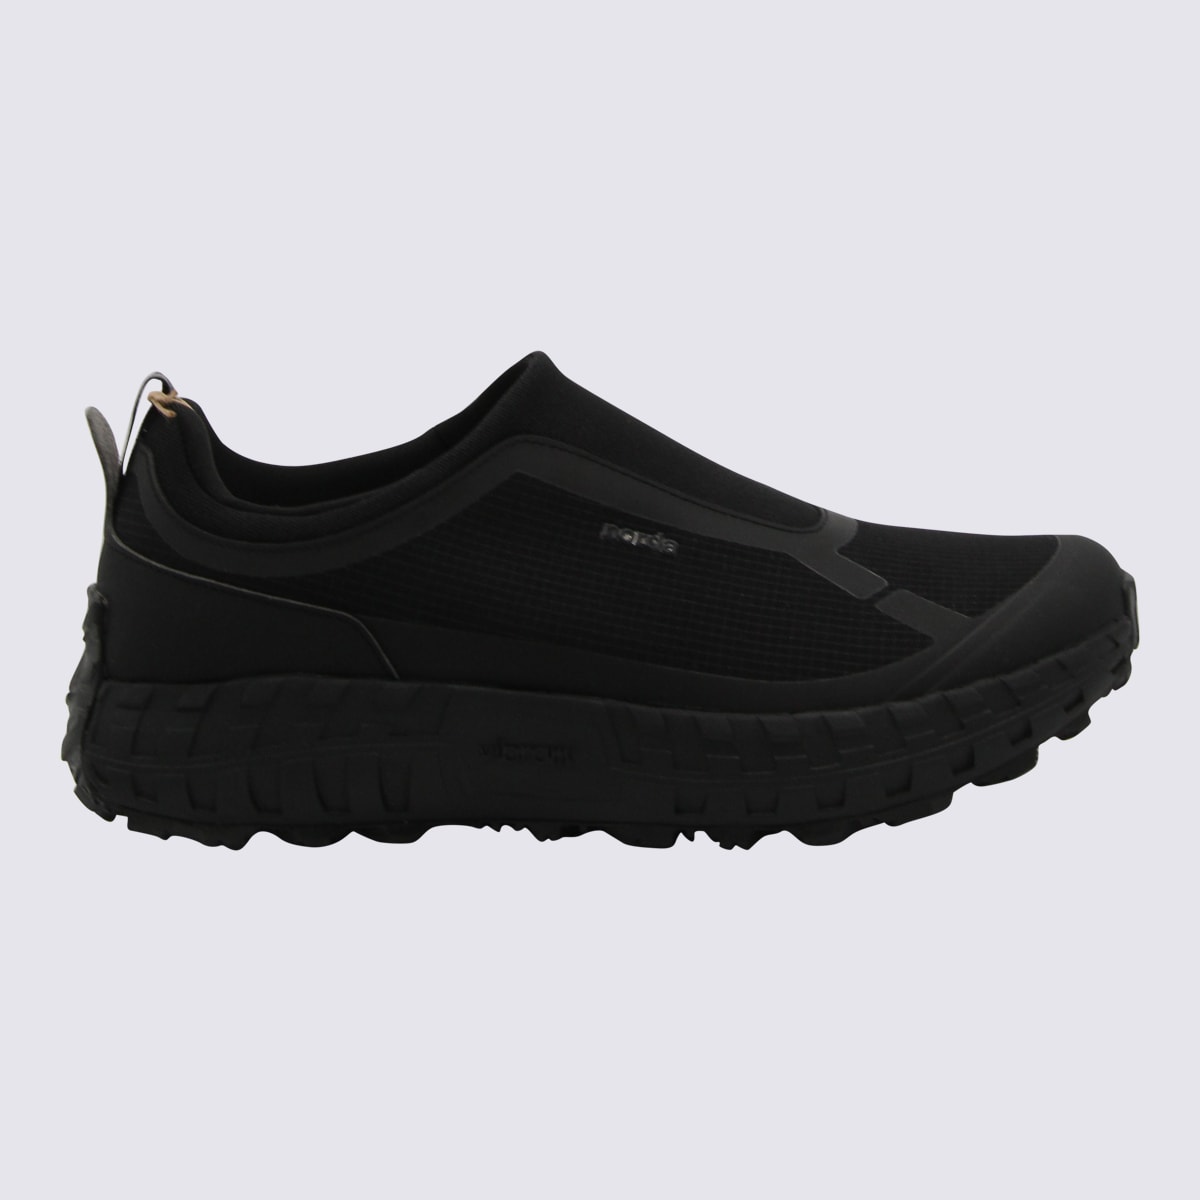 Black The 003 M Pitch Sneakers